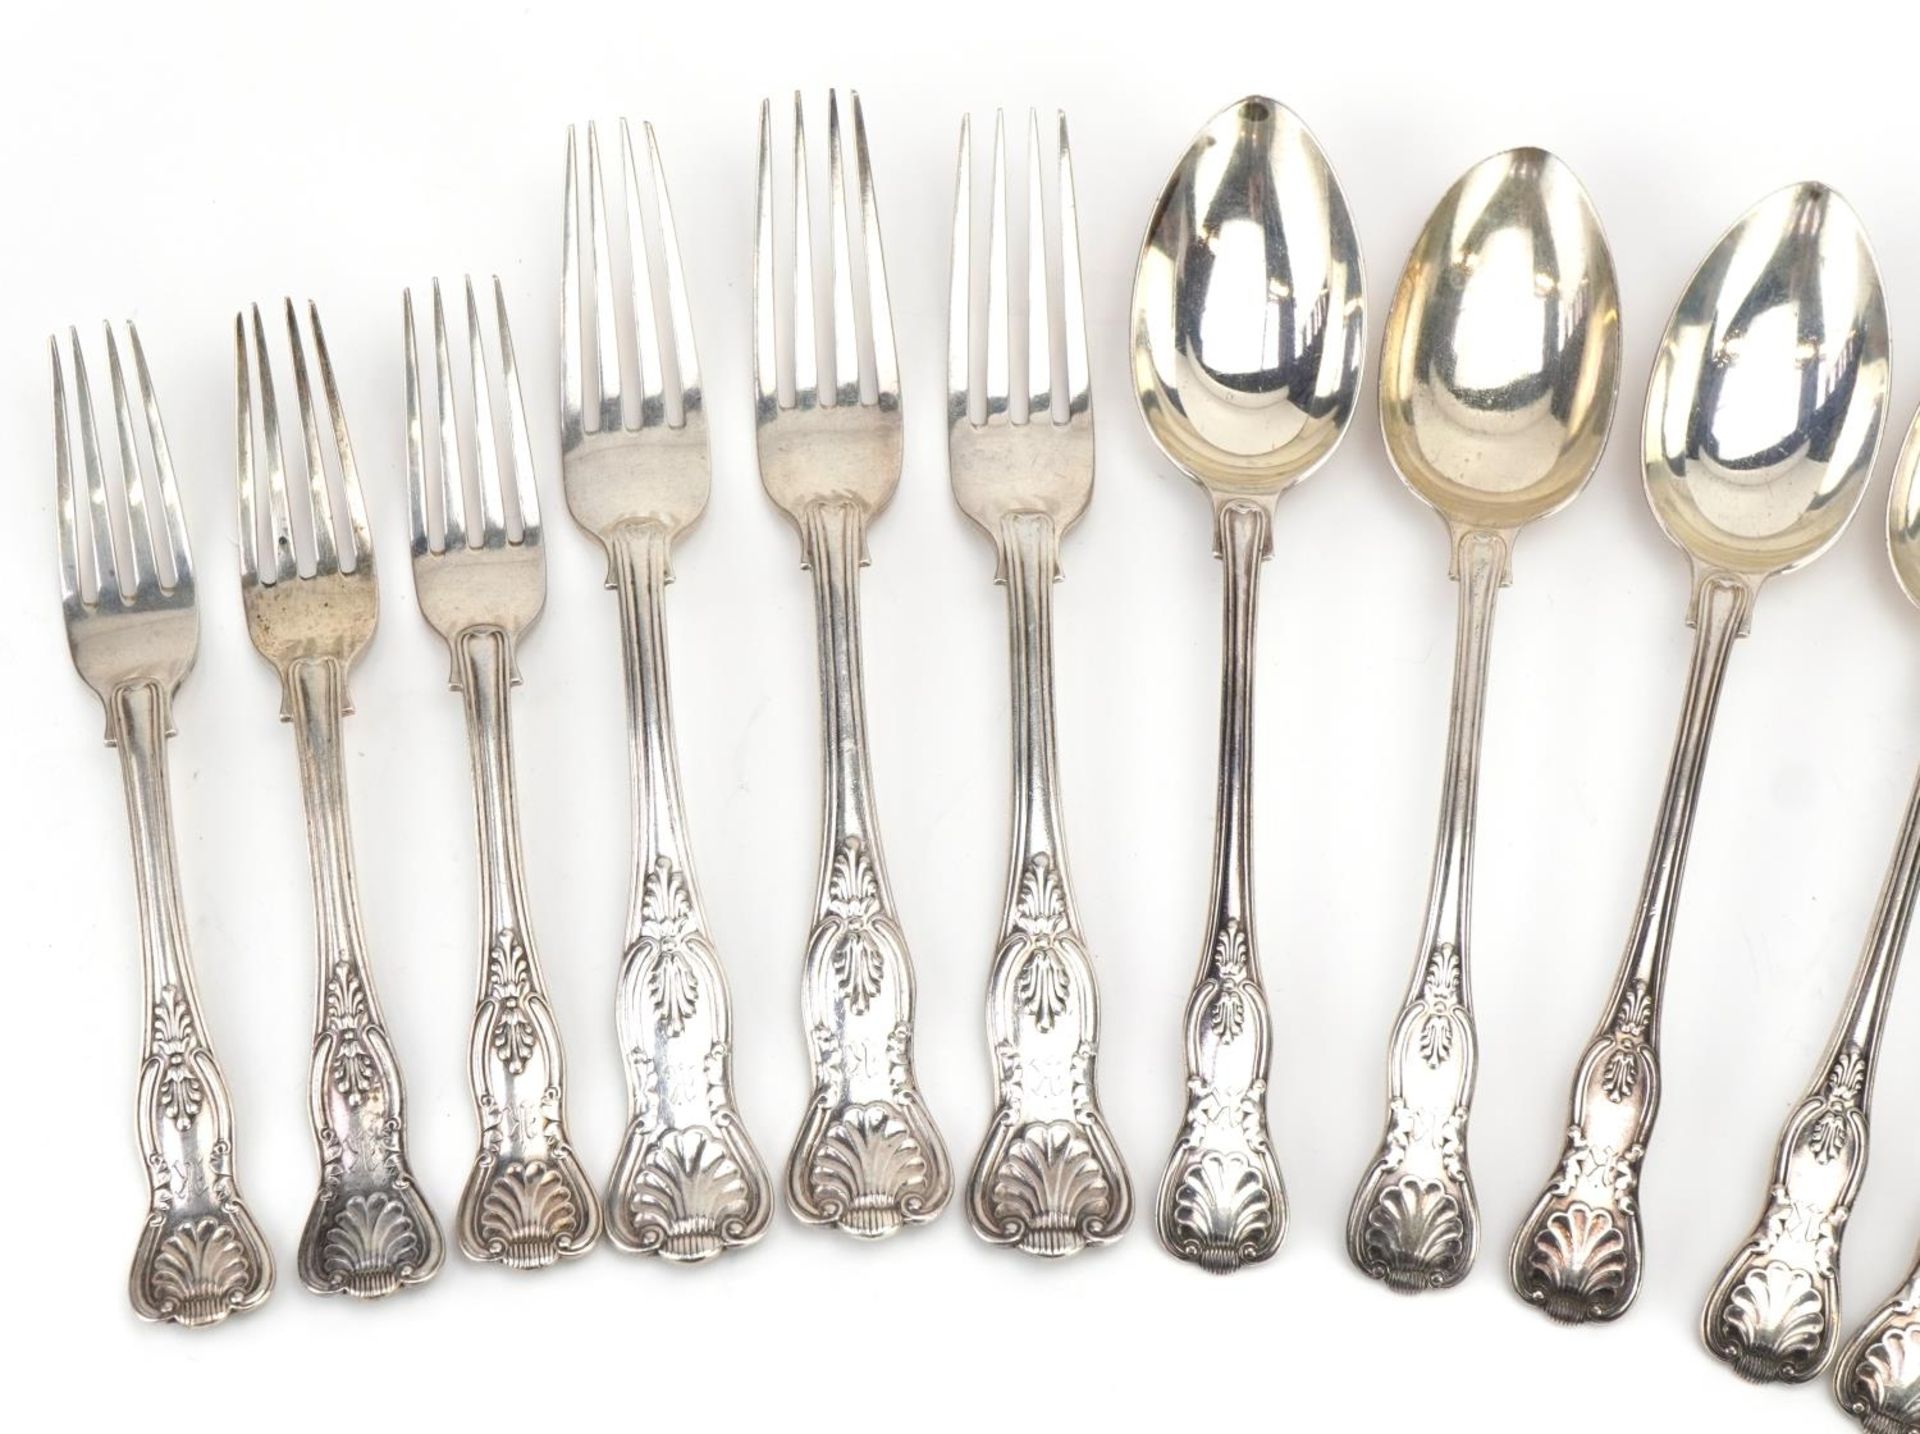 Elkington & Co Ltd, Edwardian silver cutlery comprising three table forks, five tablespoons, four - Image 2 of 4